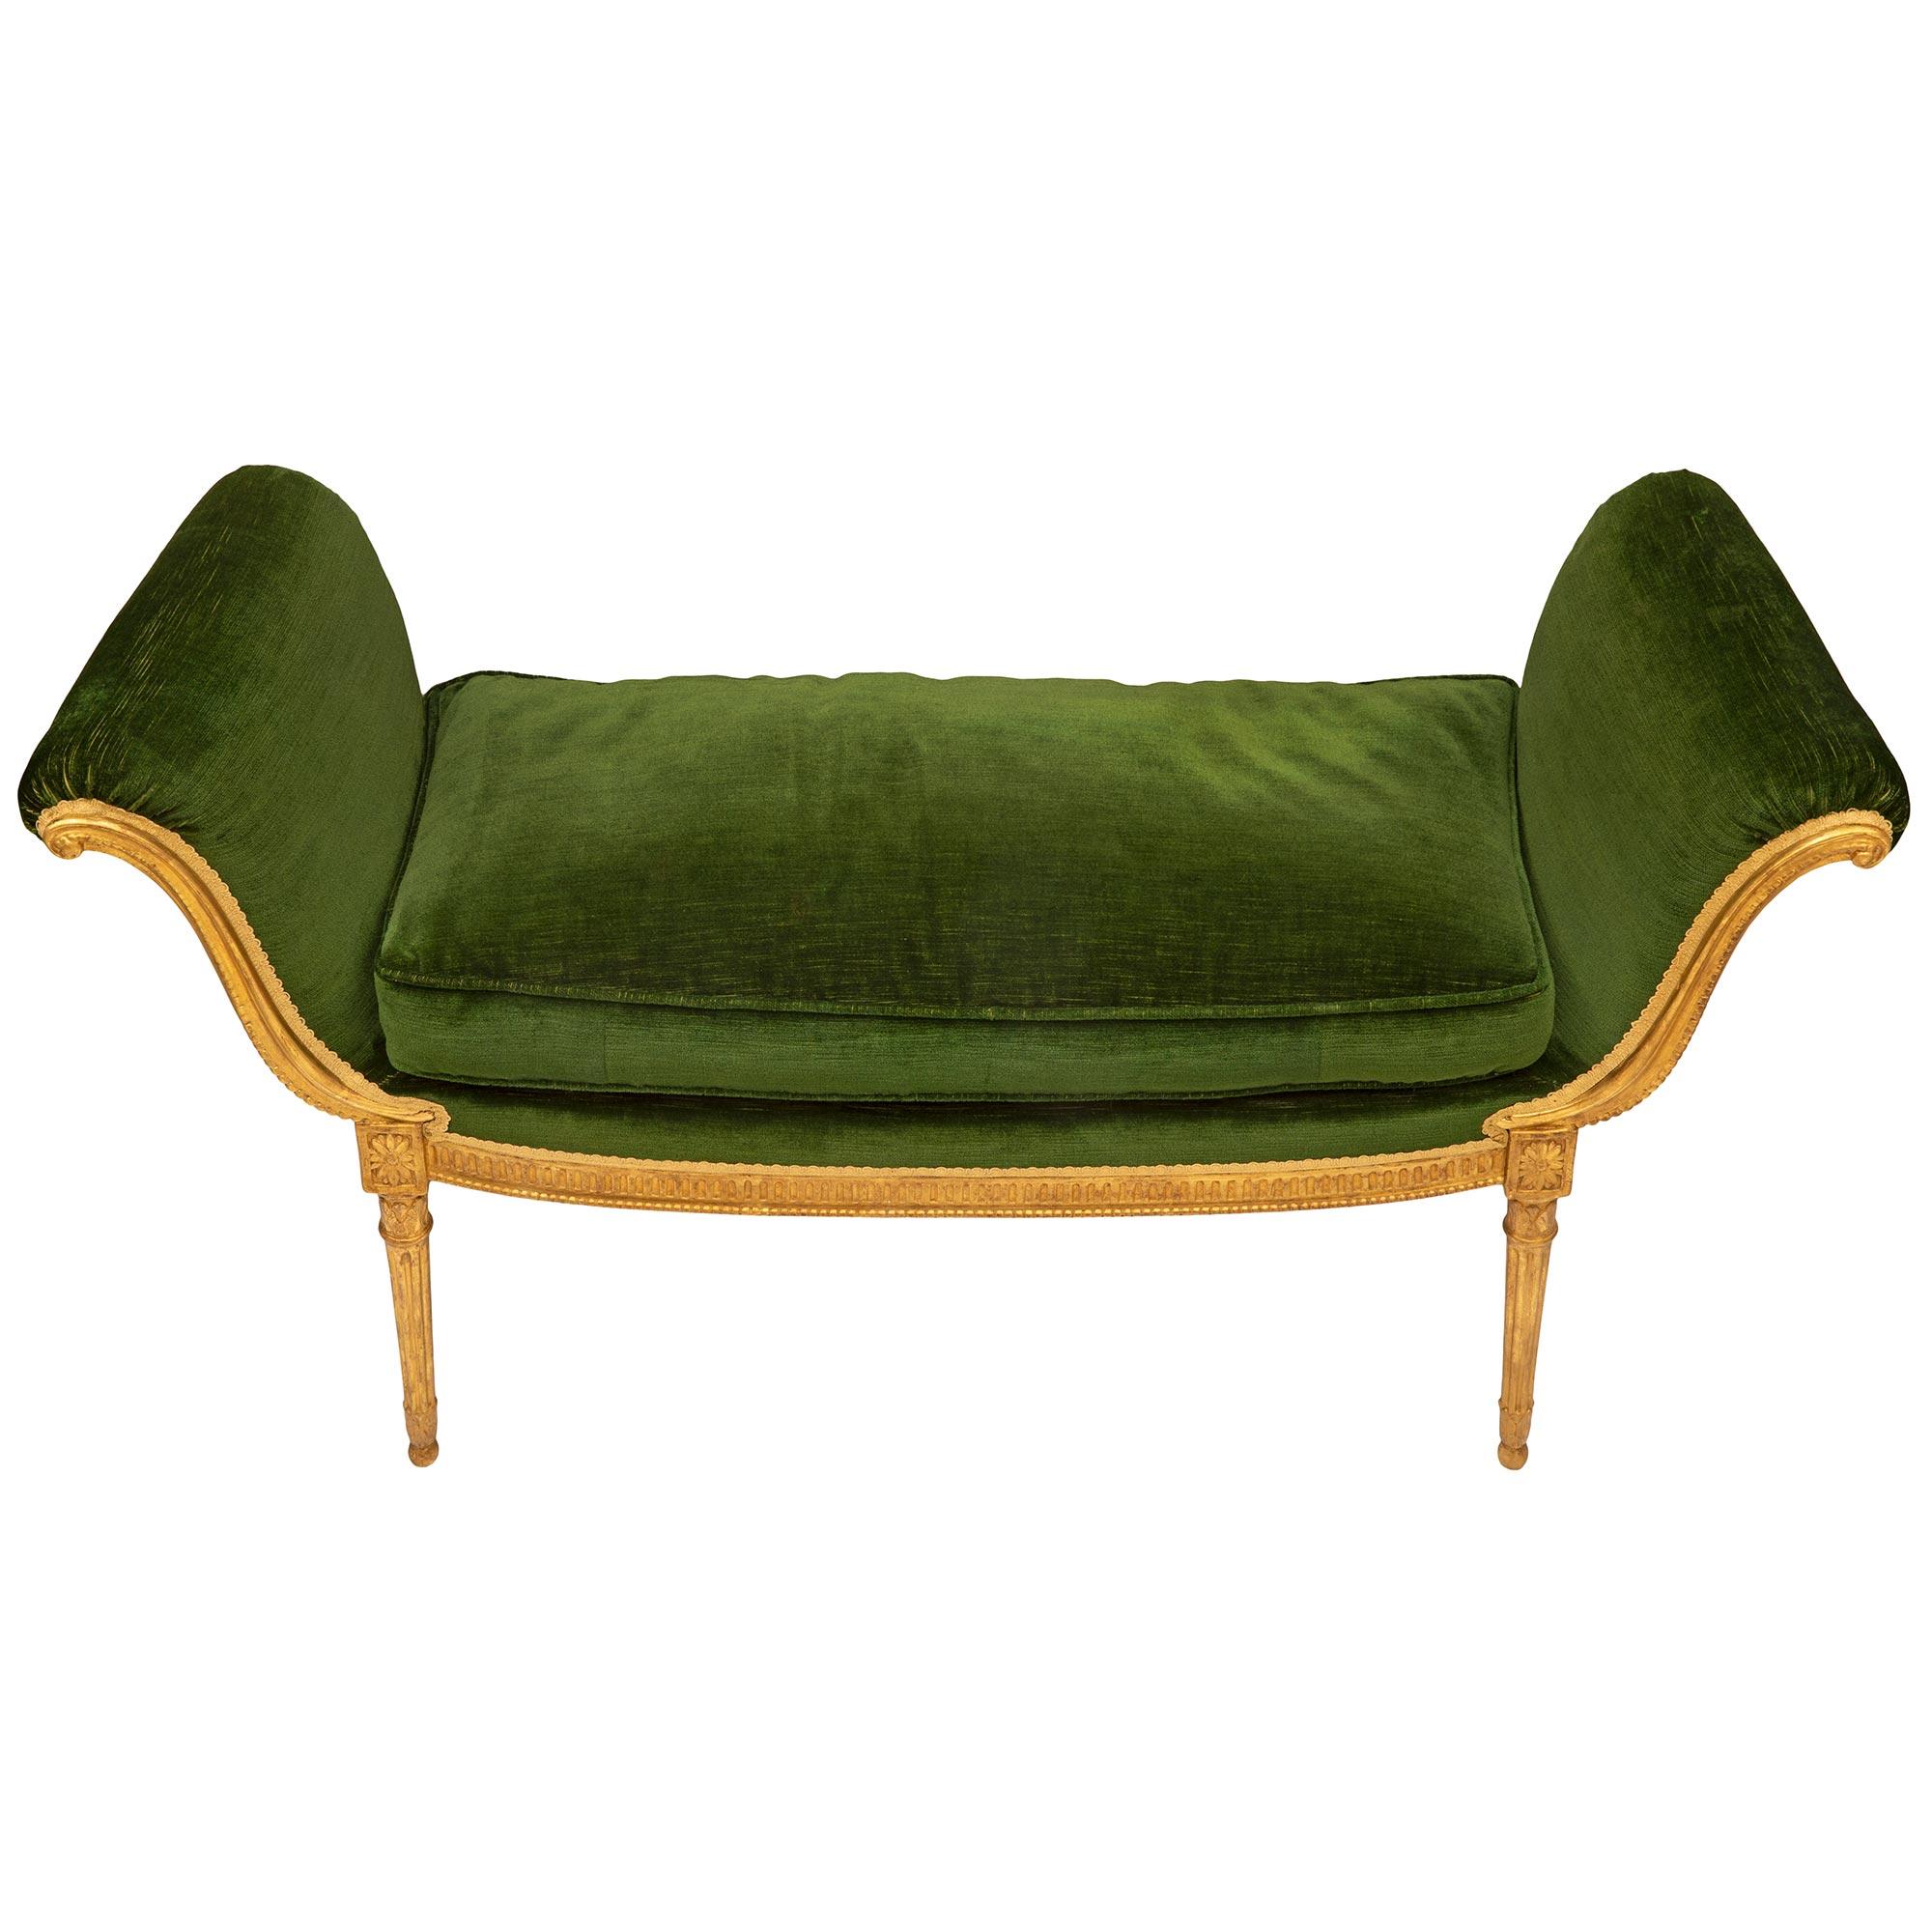 A most elegant French 19th century Louis XVI st. giltwood and green velvet bench. The bench is raised by slender circular tapered fluted legs with fine foliate and ball feet with lovely mottled top caps below block reserves. The frieze displays